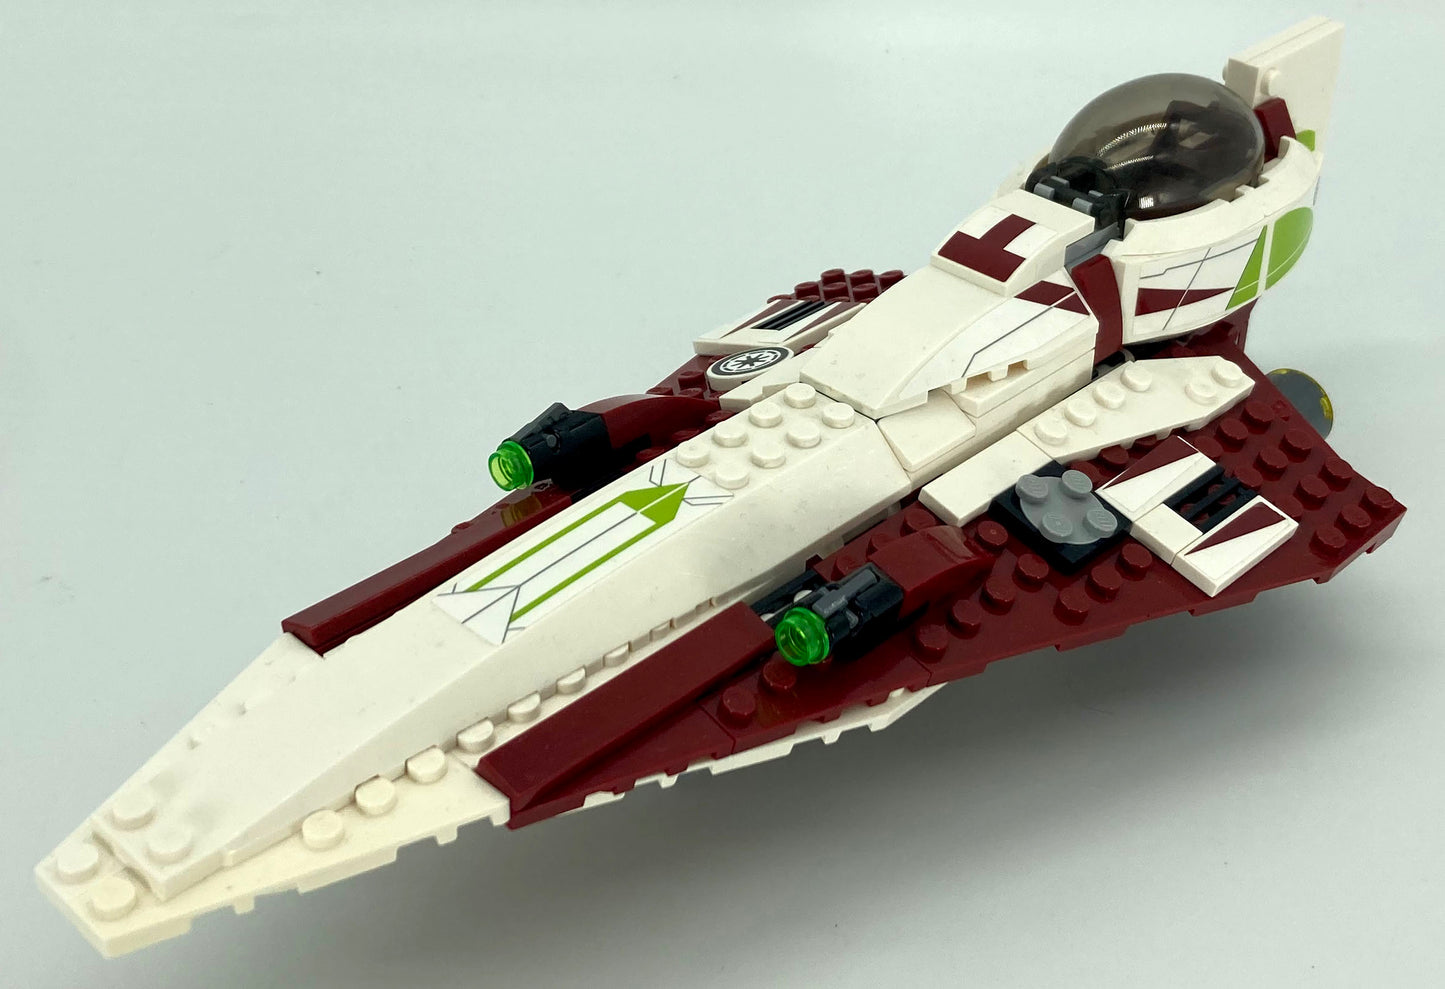 Used Set 75191 Jedi Starfighter with Hyperdrive - STARFIGHTER ONLY (No Instruction Manual or Box)